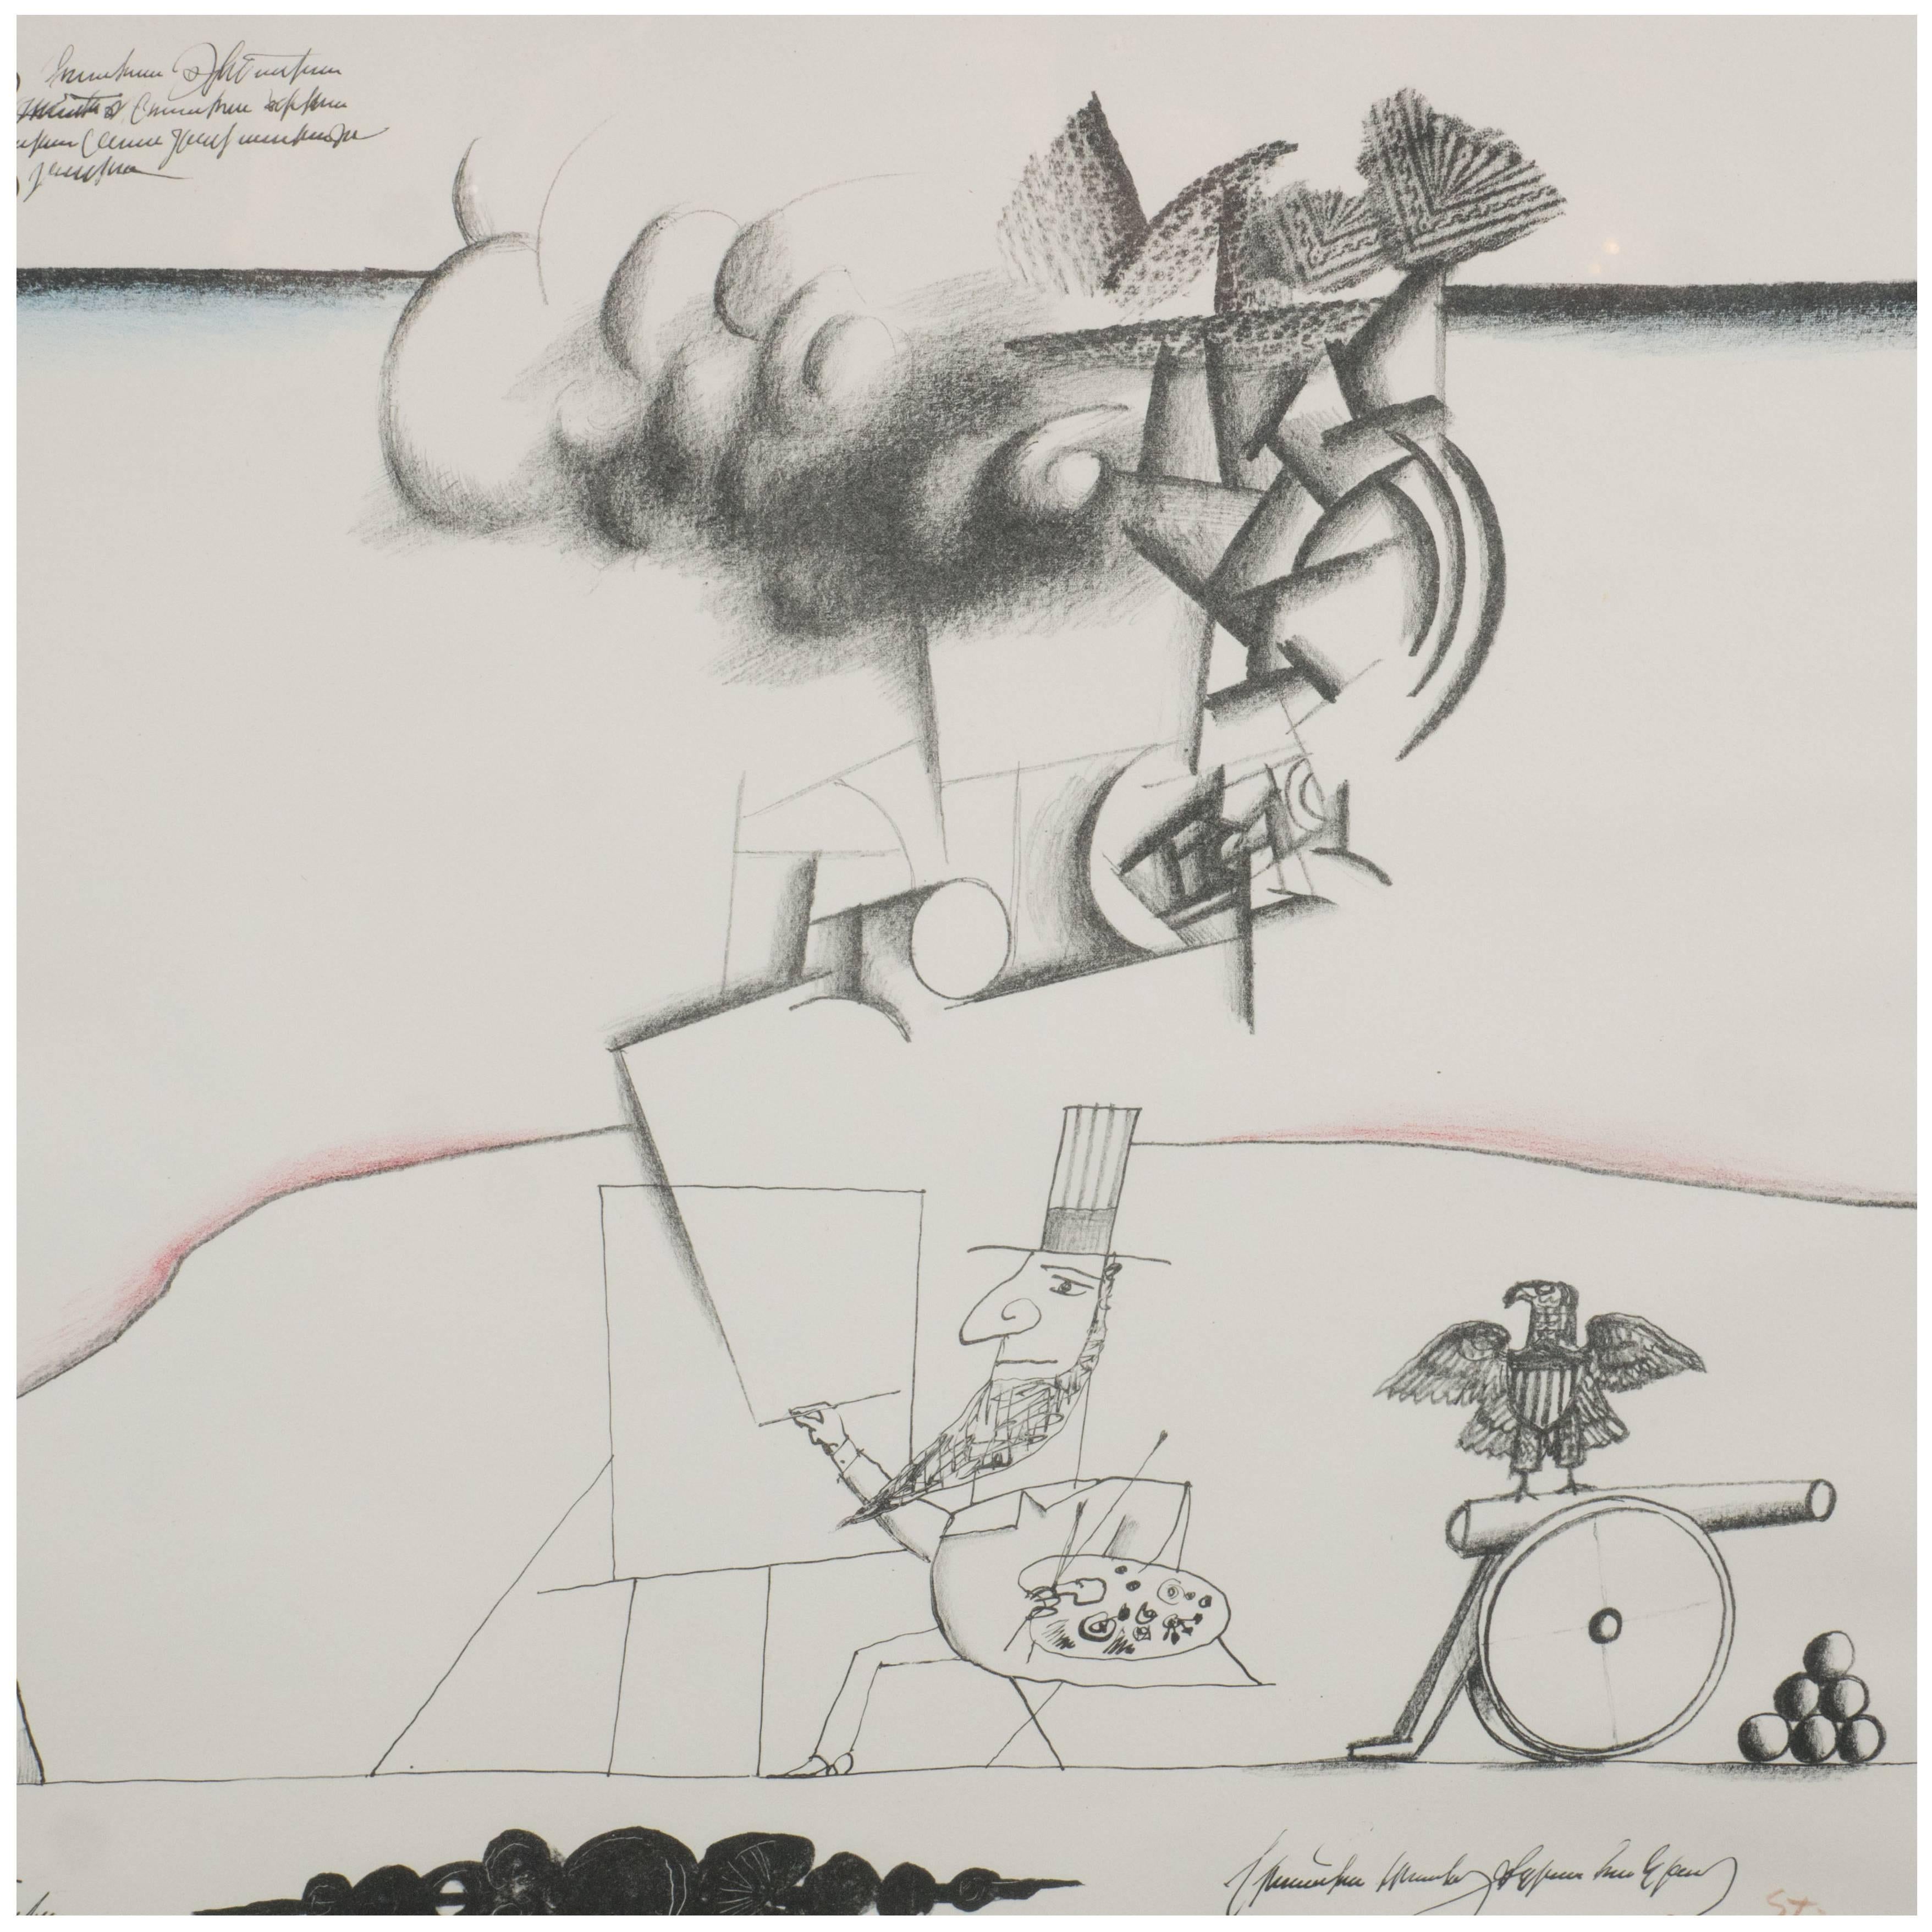 American Saul Steinberg (1914-1999) Sam's art from New York international.

A charming cartoon-style drawing, featuring a seated figure of Abraham Lincoln at an easel, drawing doodles loosely based on American printed currency, with an American